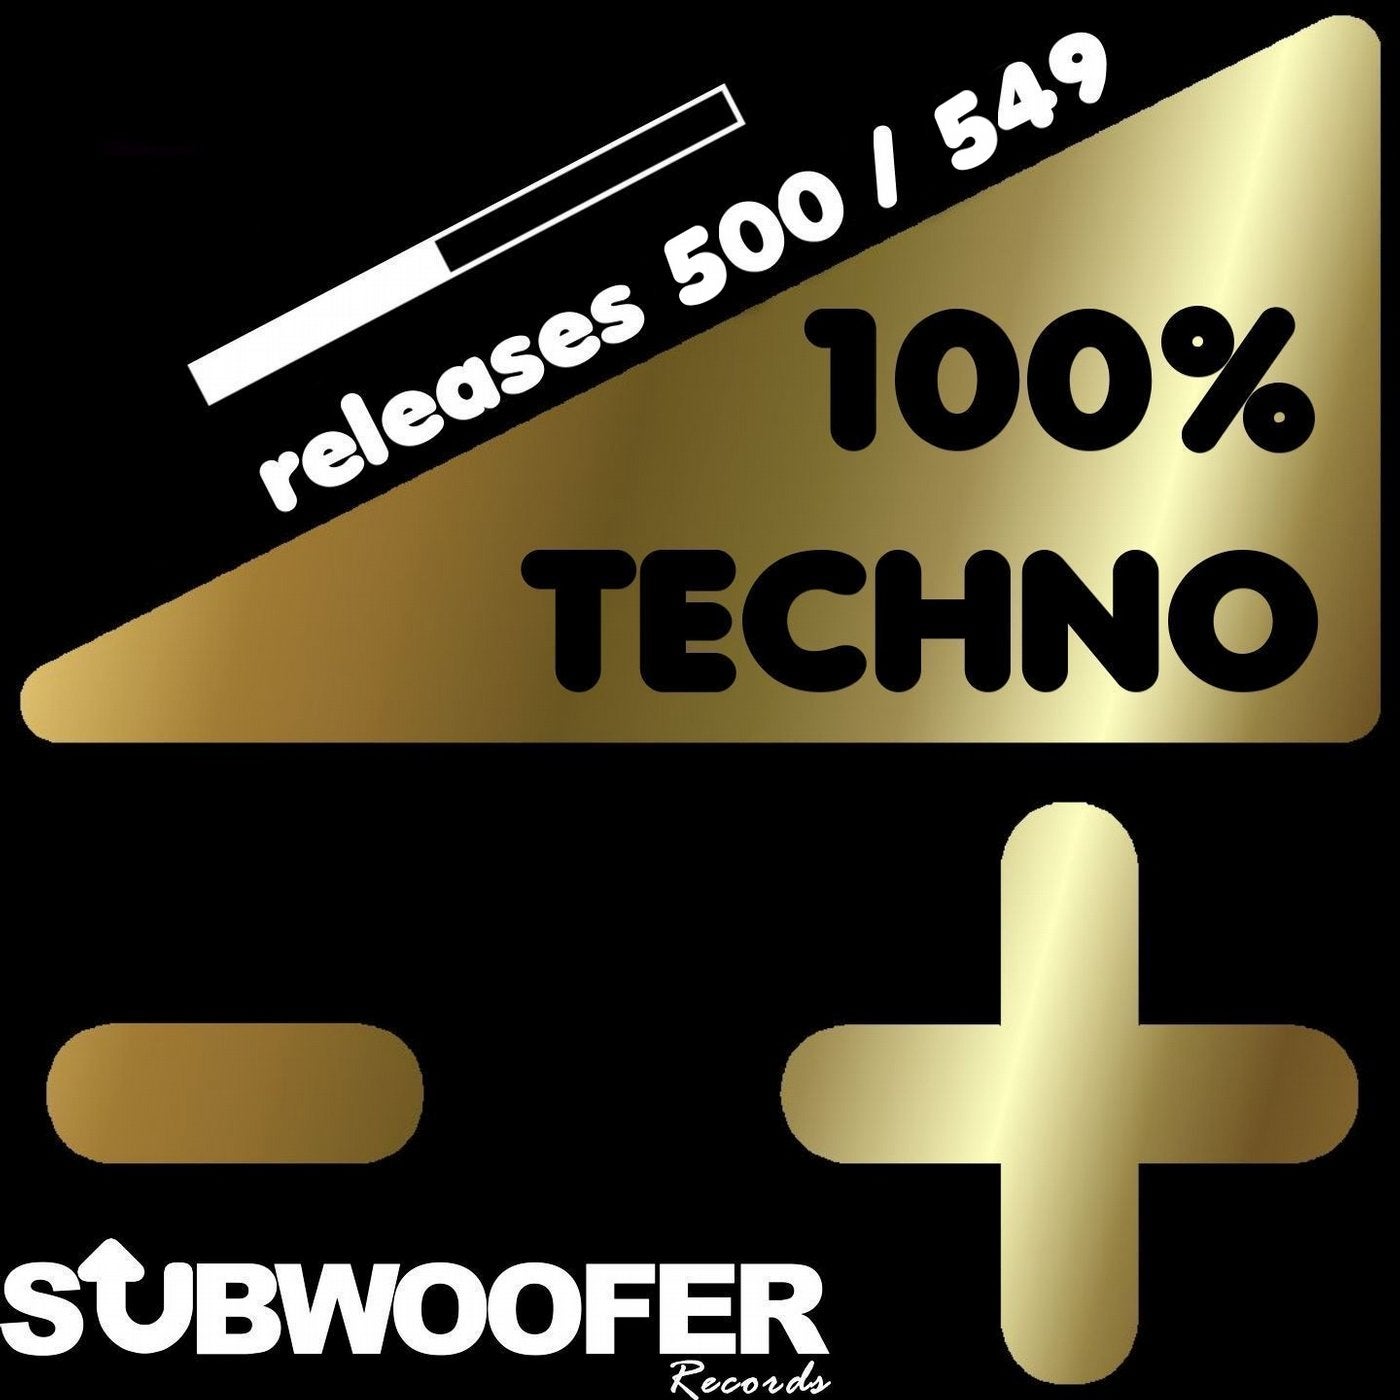 100%% Techno Subwoofer Records, Vol. 11 (Releases 500 / 549)